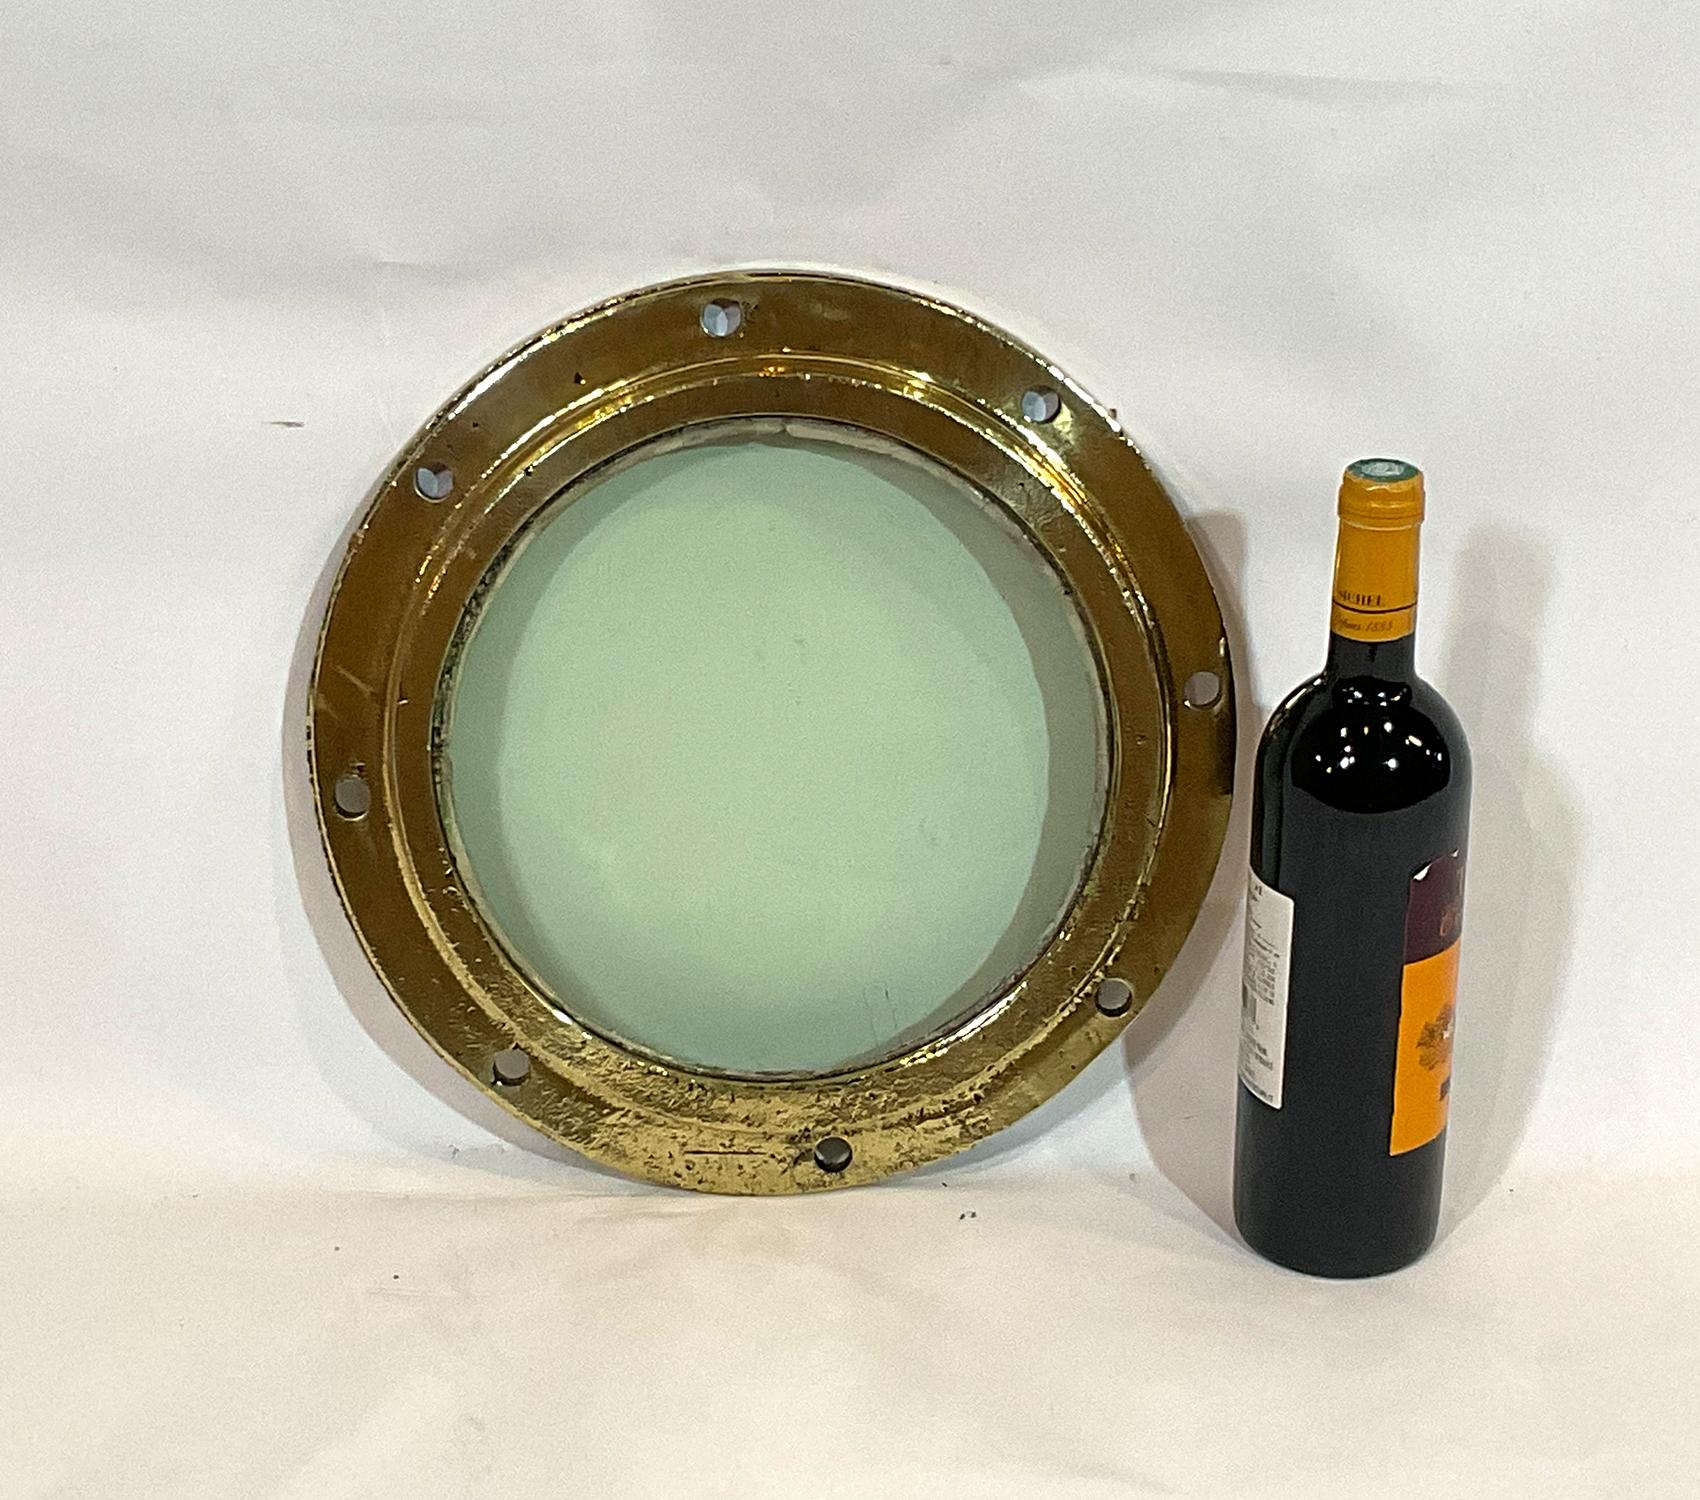 North American Solid Brass Ships Fixed Porthole with Tempered Glass